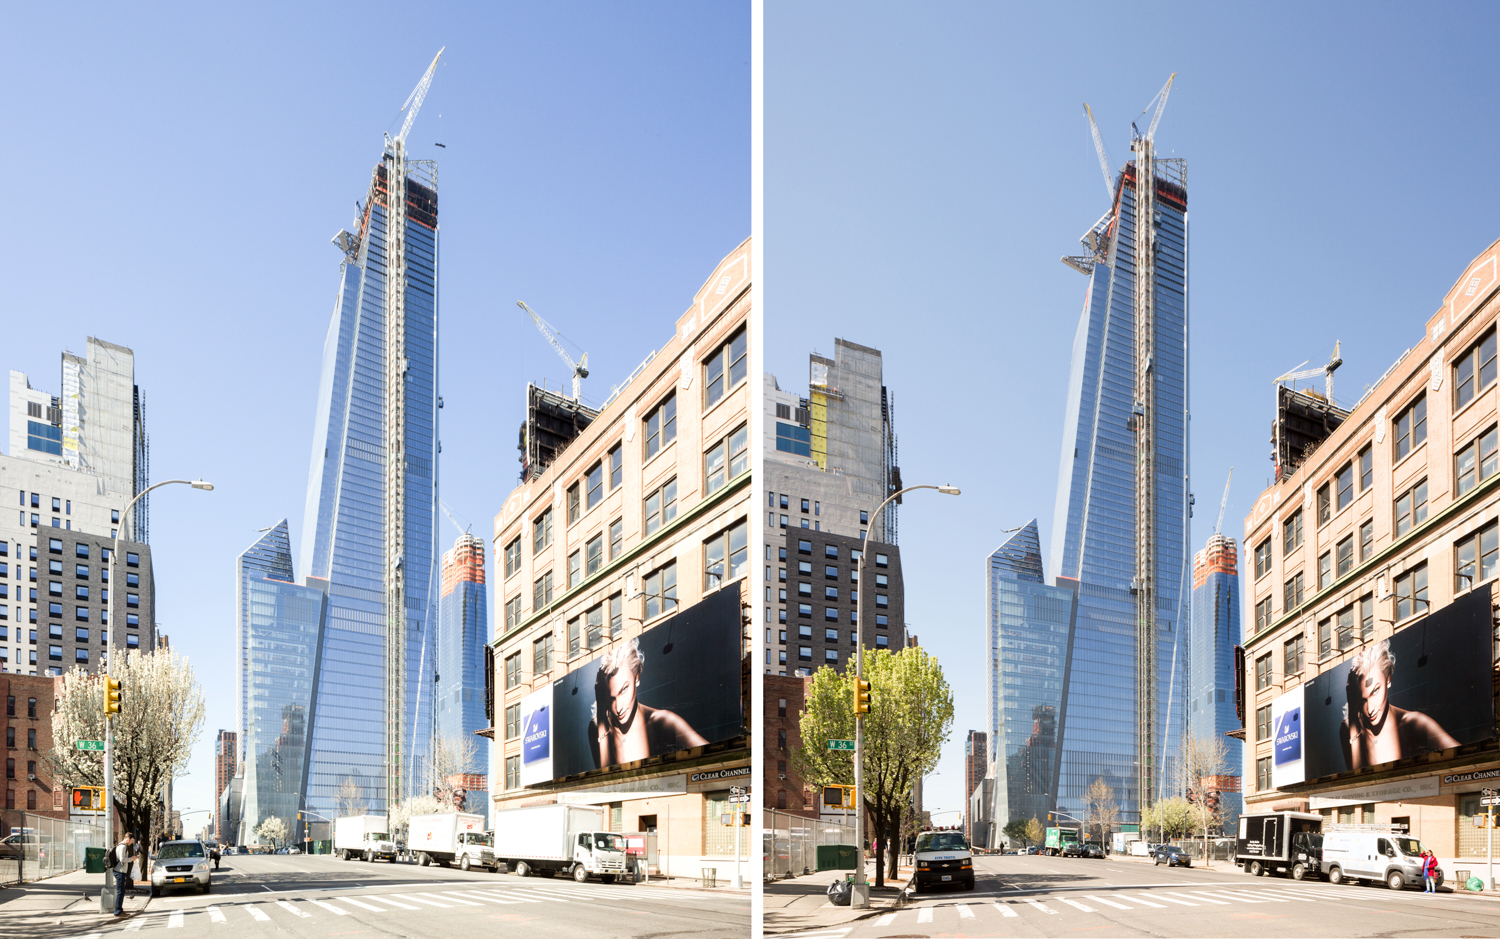 30 Hudson Yards from April 23rd versus May 1st, image by Andrew Campbell Nelson